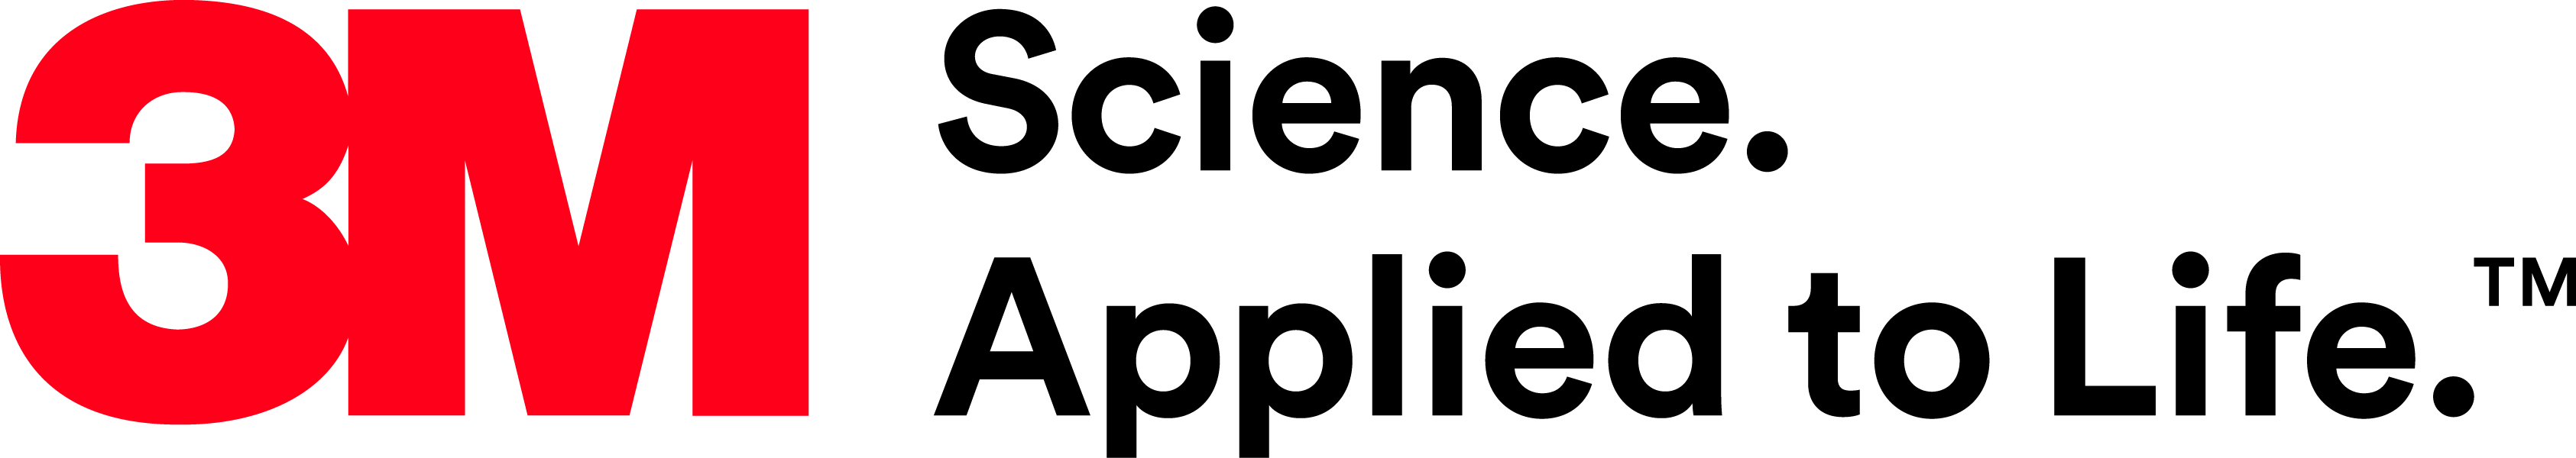 3m Science Applied to Life Logo